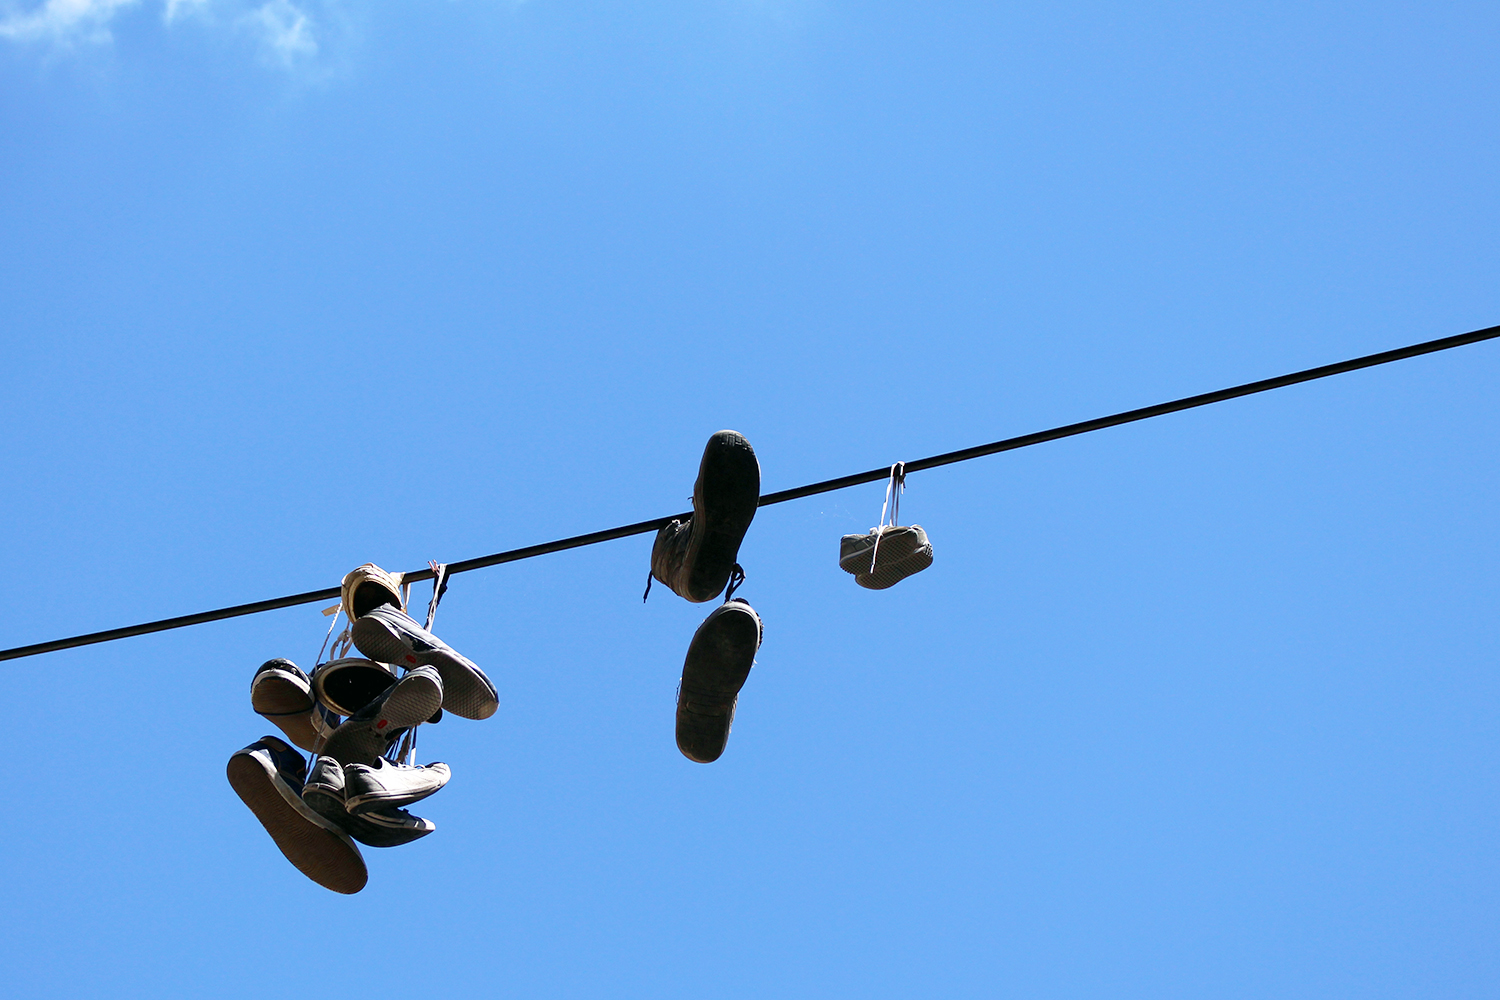 Travelettes » Shoes hanging over power cables in Ljubljana | Travelettes